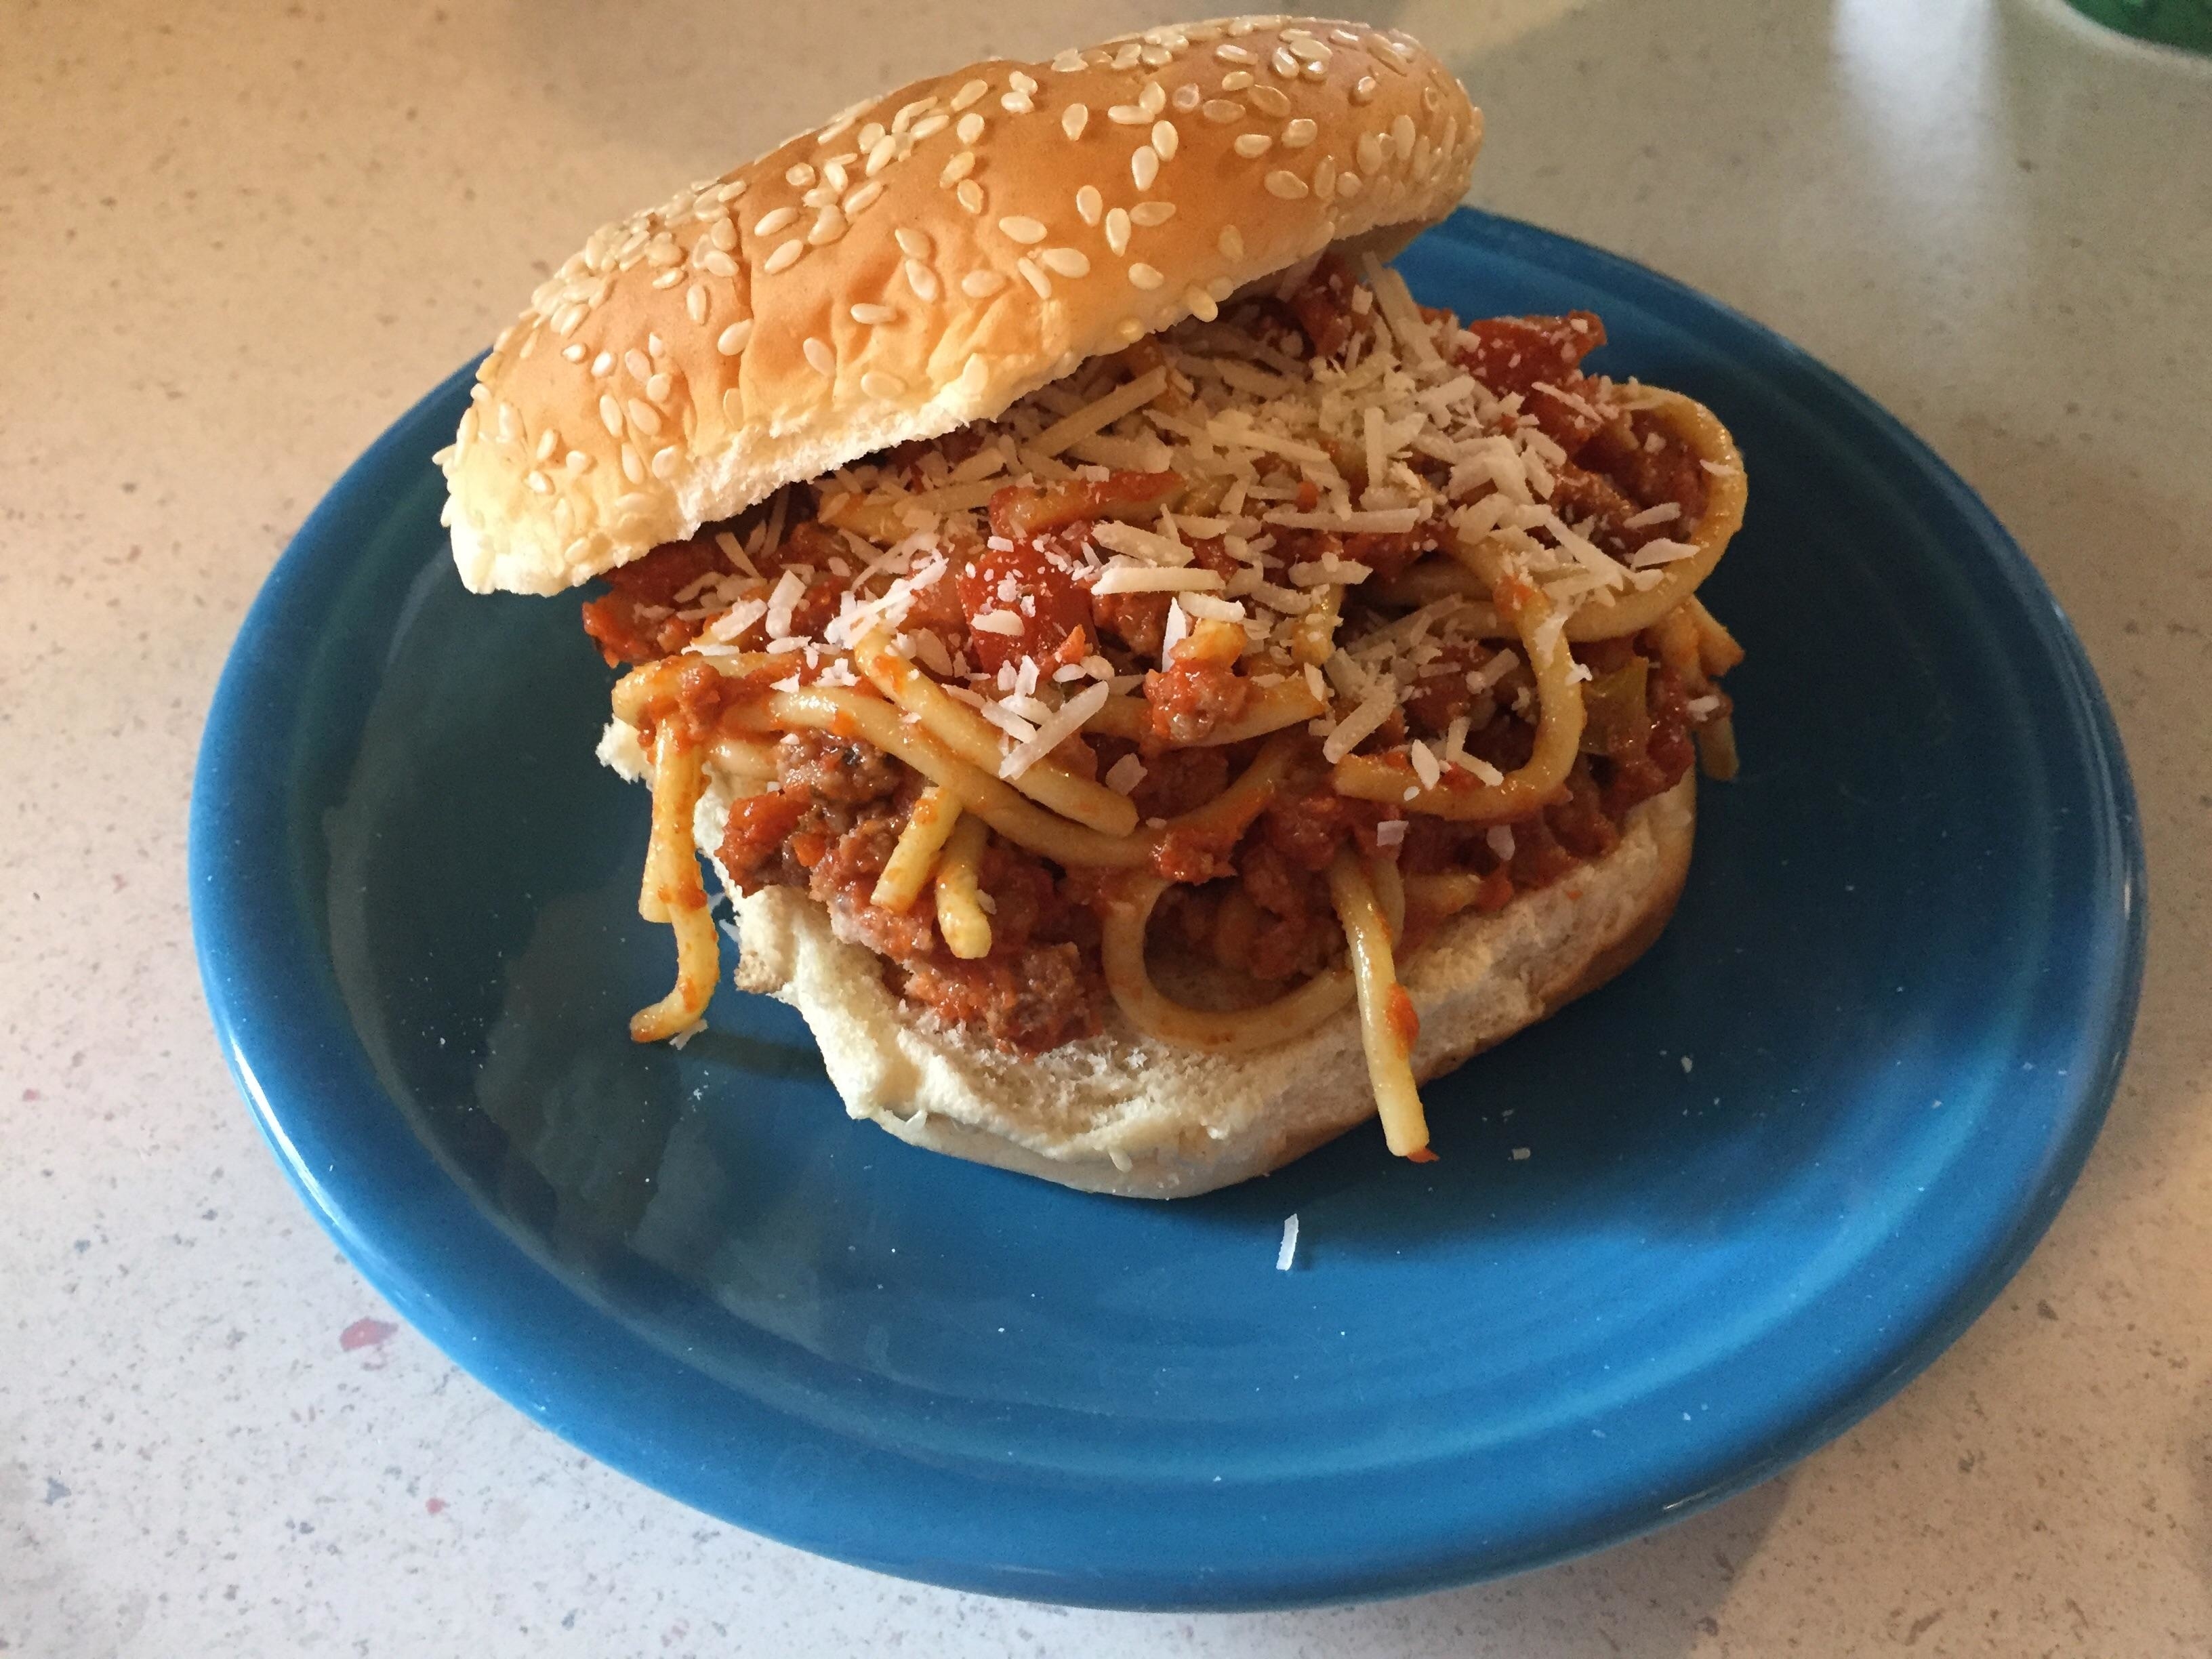 A spaghetti sandwich with meat sauce and shredded cheese on a sesame seed bun, served on a blue plate